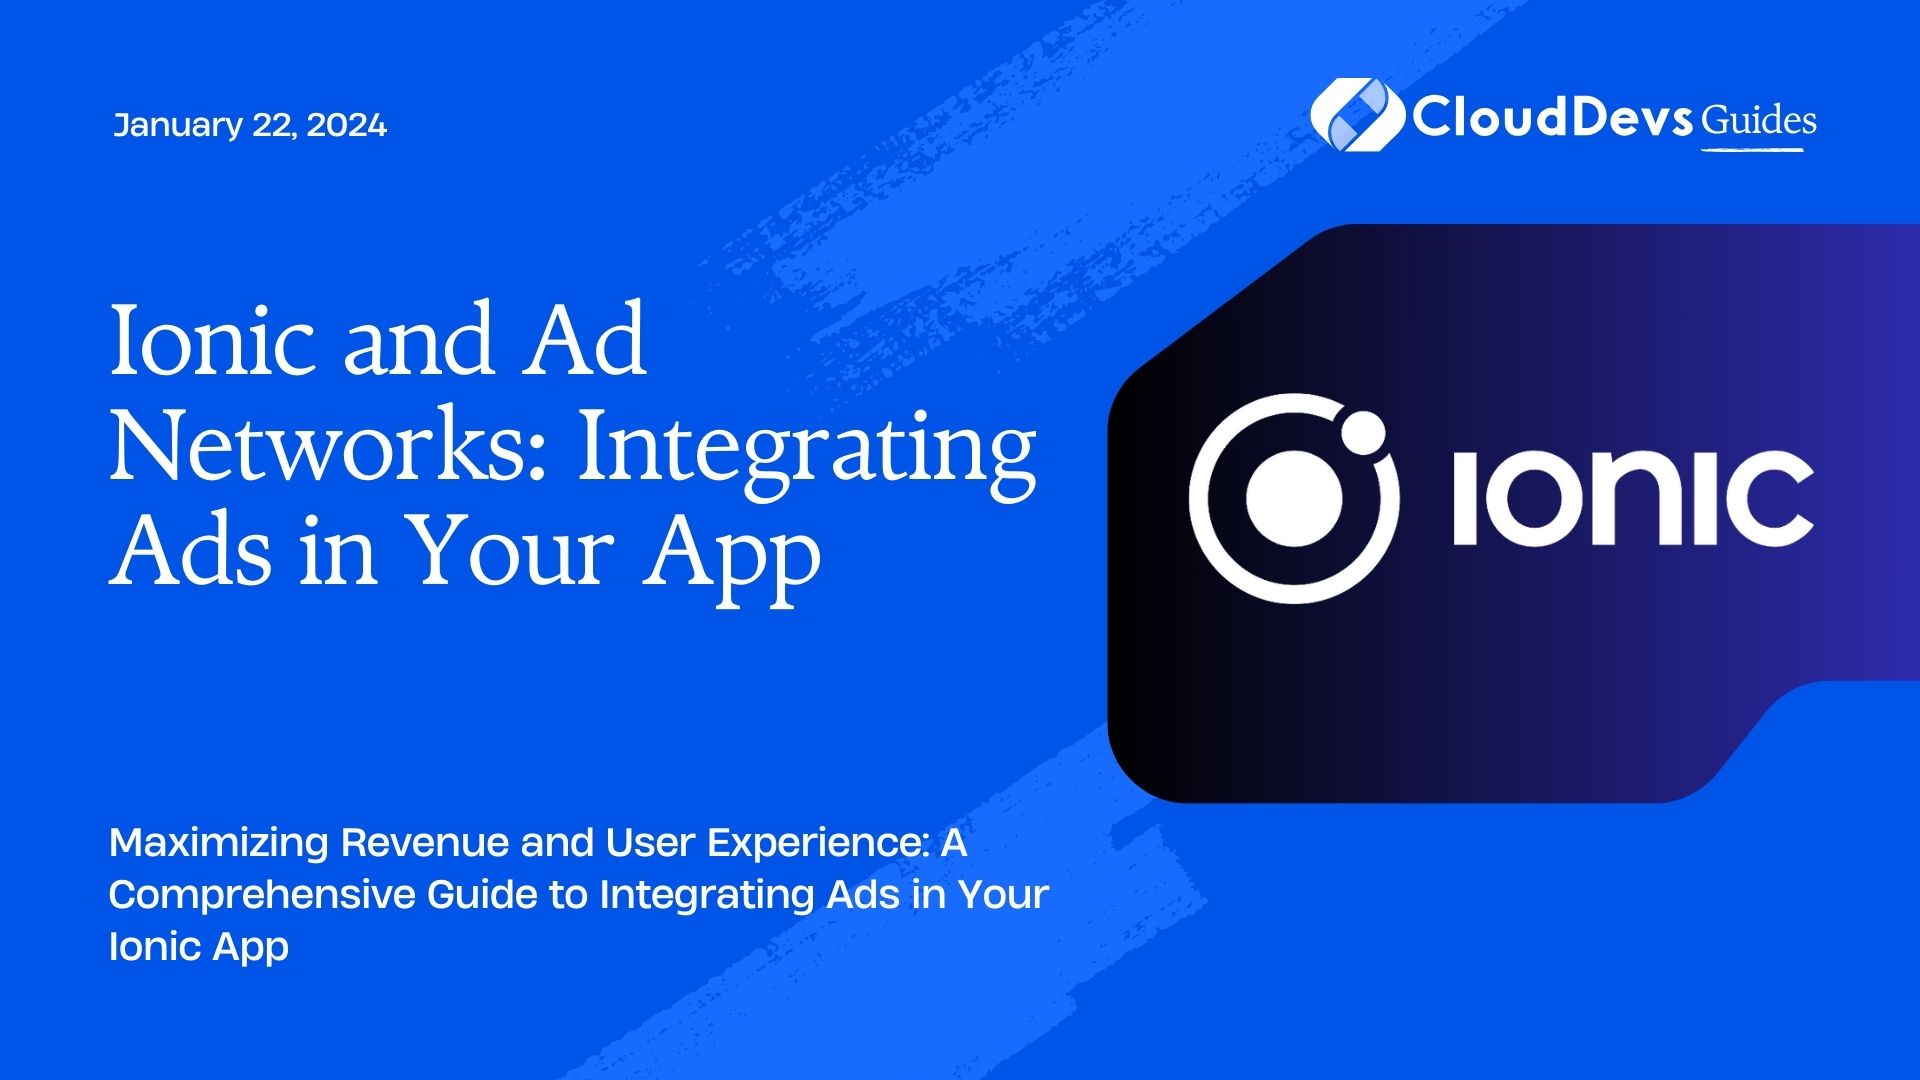 Ionic and Ad Networks: Integrating Ads in Your App